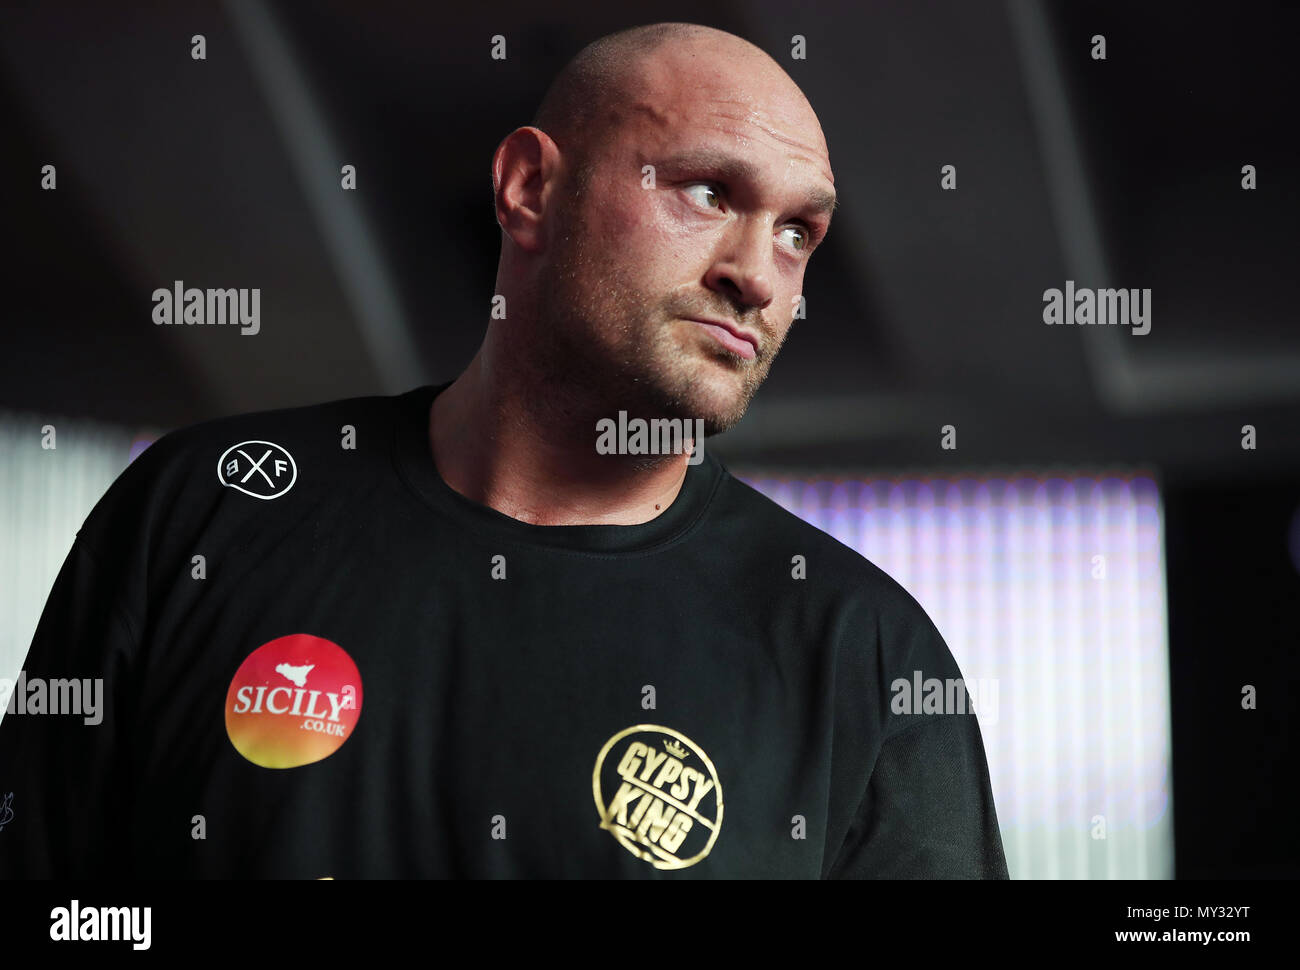 Tyson Fury during the public workout at the National Football Museum, Manchester. PRESS ASSOCIATION Photo. Picture date: Tuesday June 5, 2018. See PA story BOXING Manchester. Photo credit should read: Nick Potts/PA Wire Stock Photo